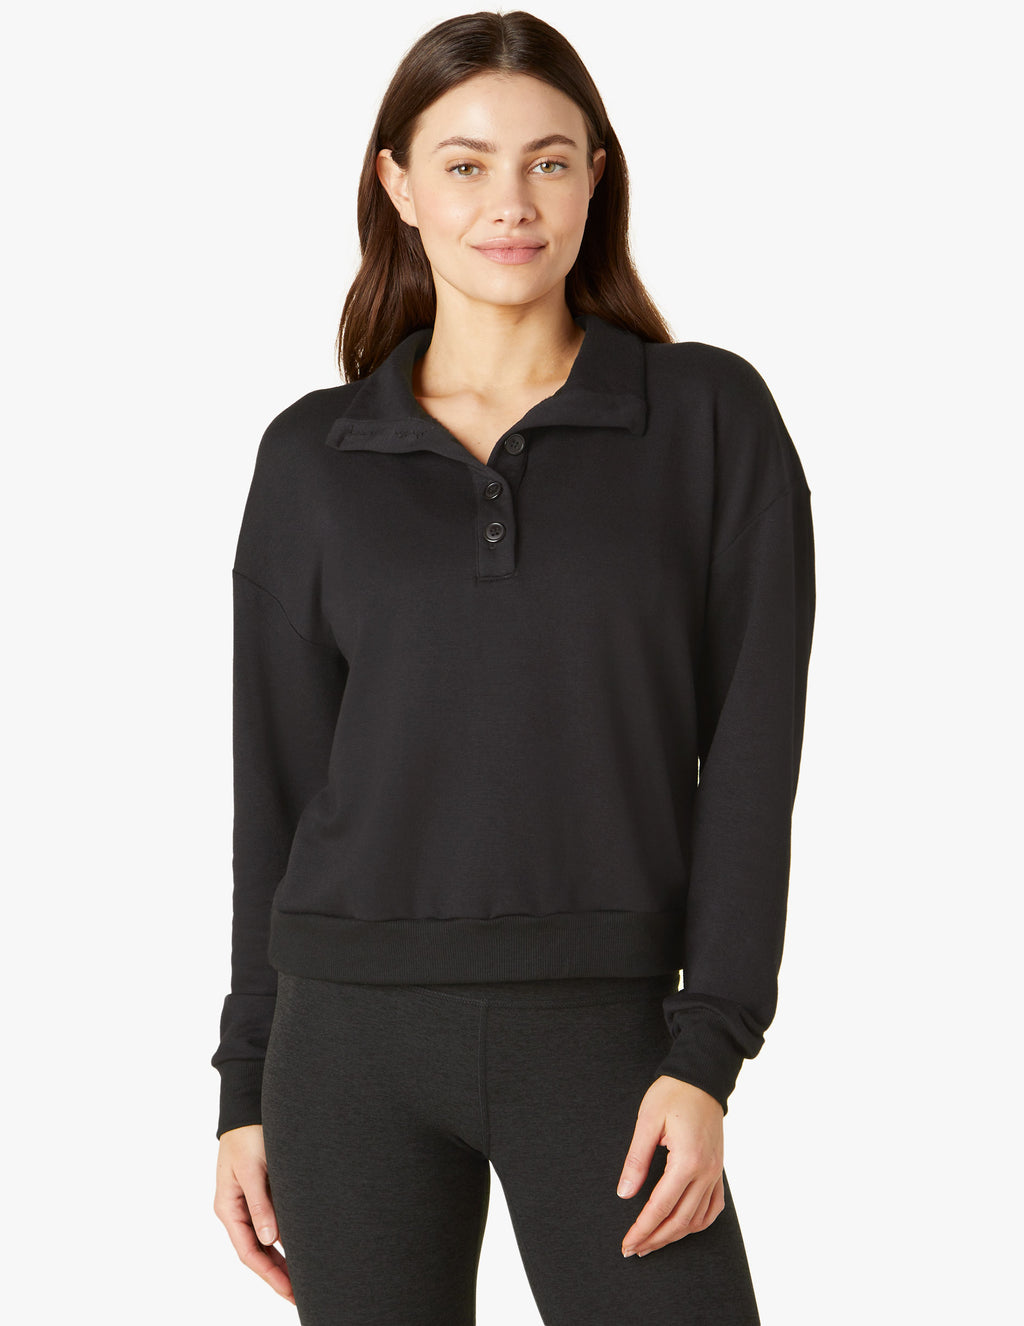 East Coast Button Pullover Featured Image